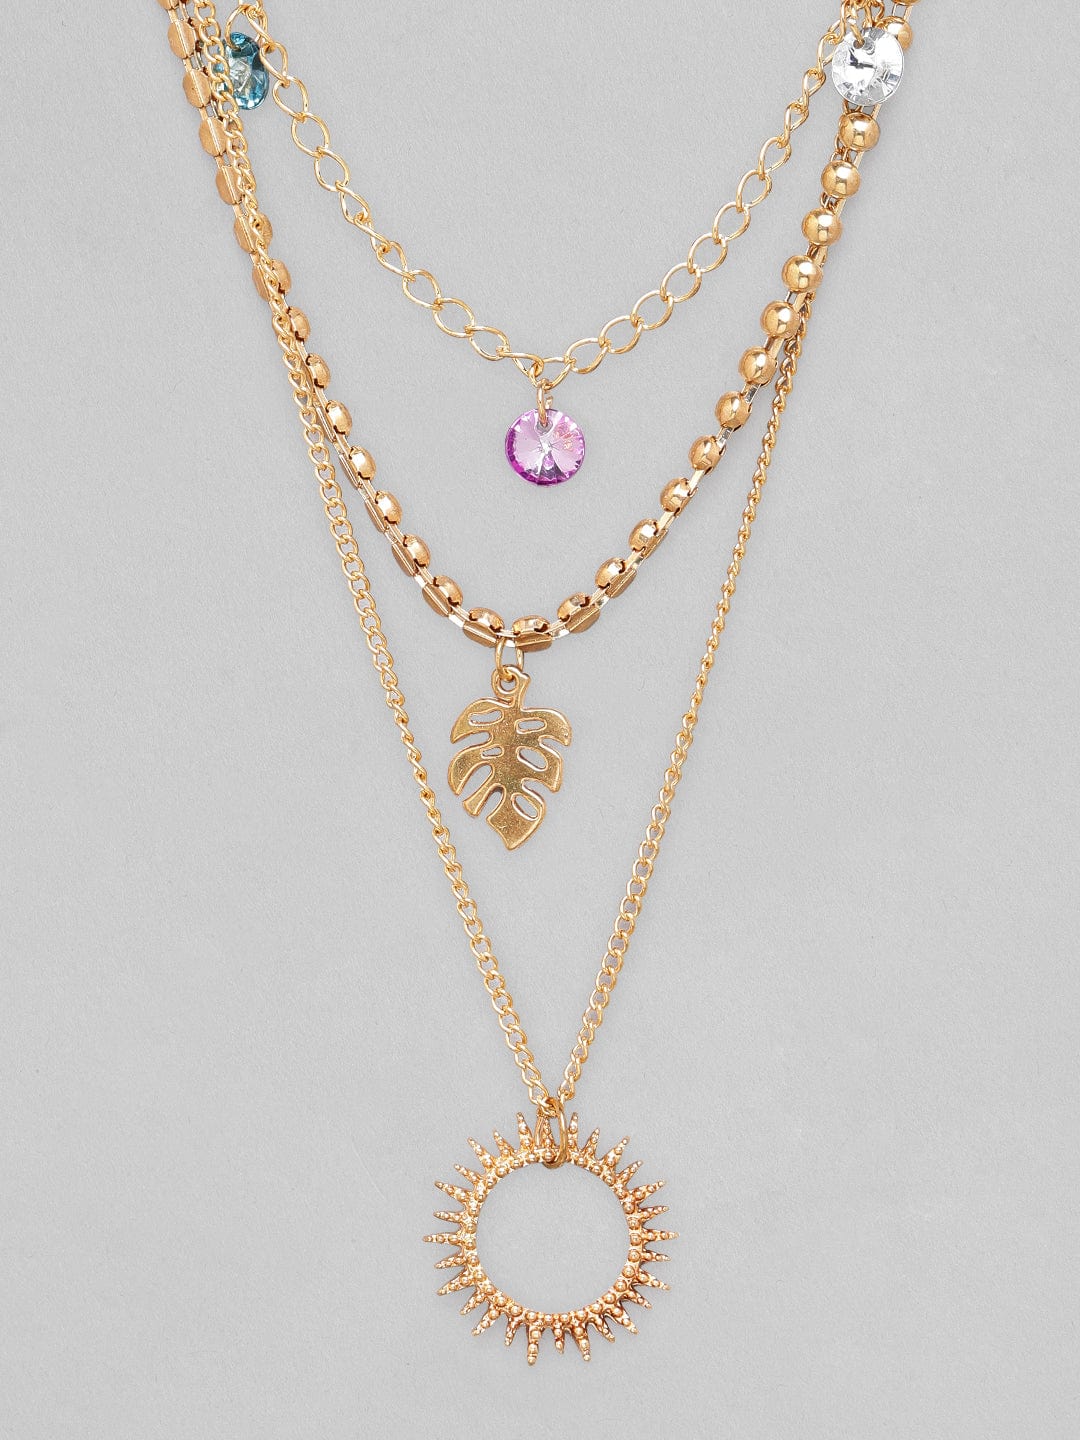 Rubans Voguish Gold-Plated Layered Chain Necklaces, Necklace Sets, Chains & Mangalsutra